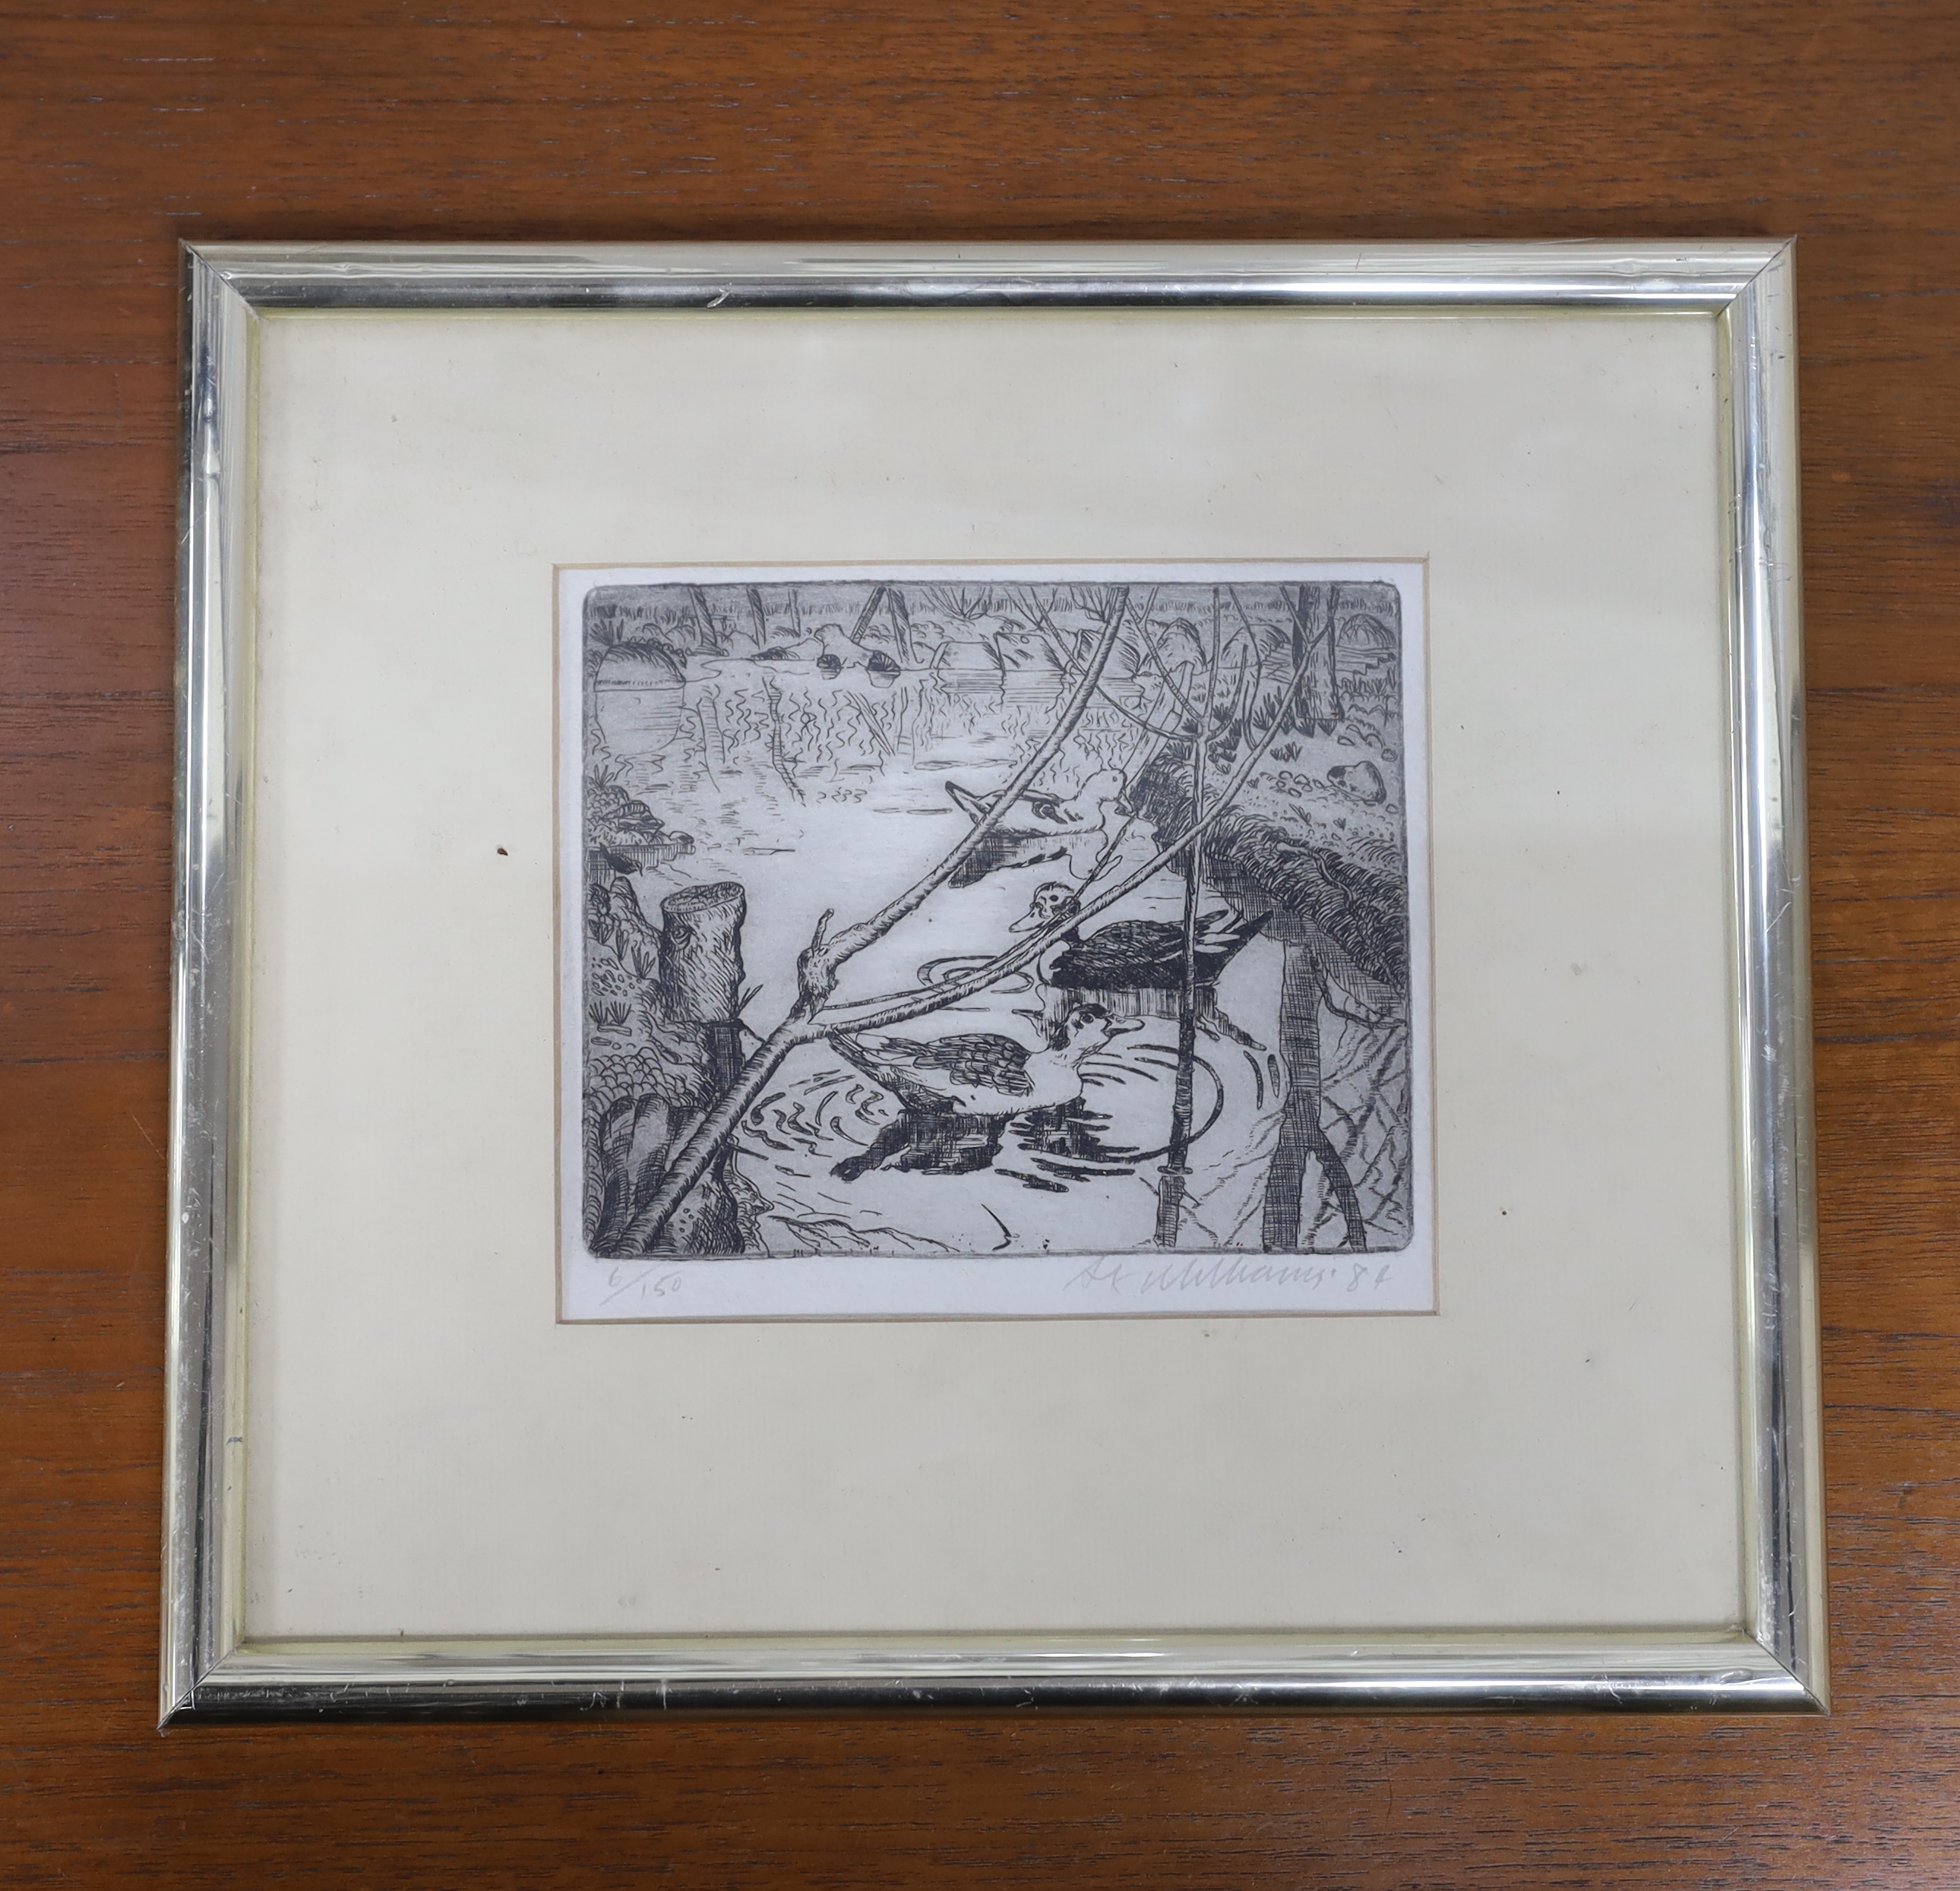 Alex Williams, etching, Ducks on the water, signed and dated '84, 6/150, 12 x 15cm